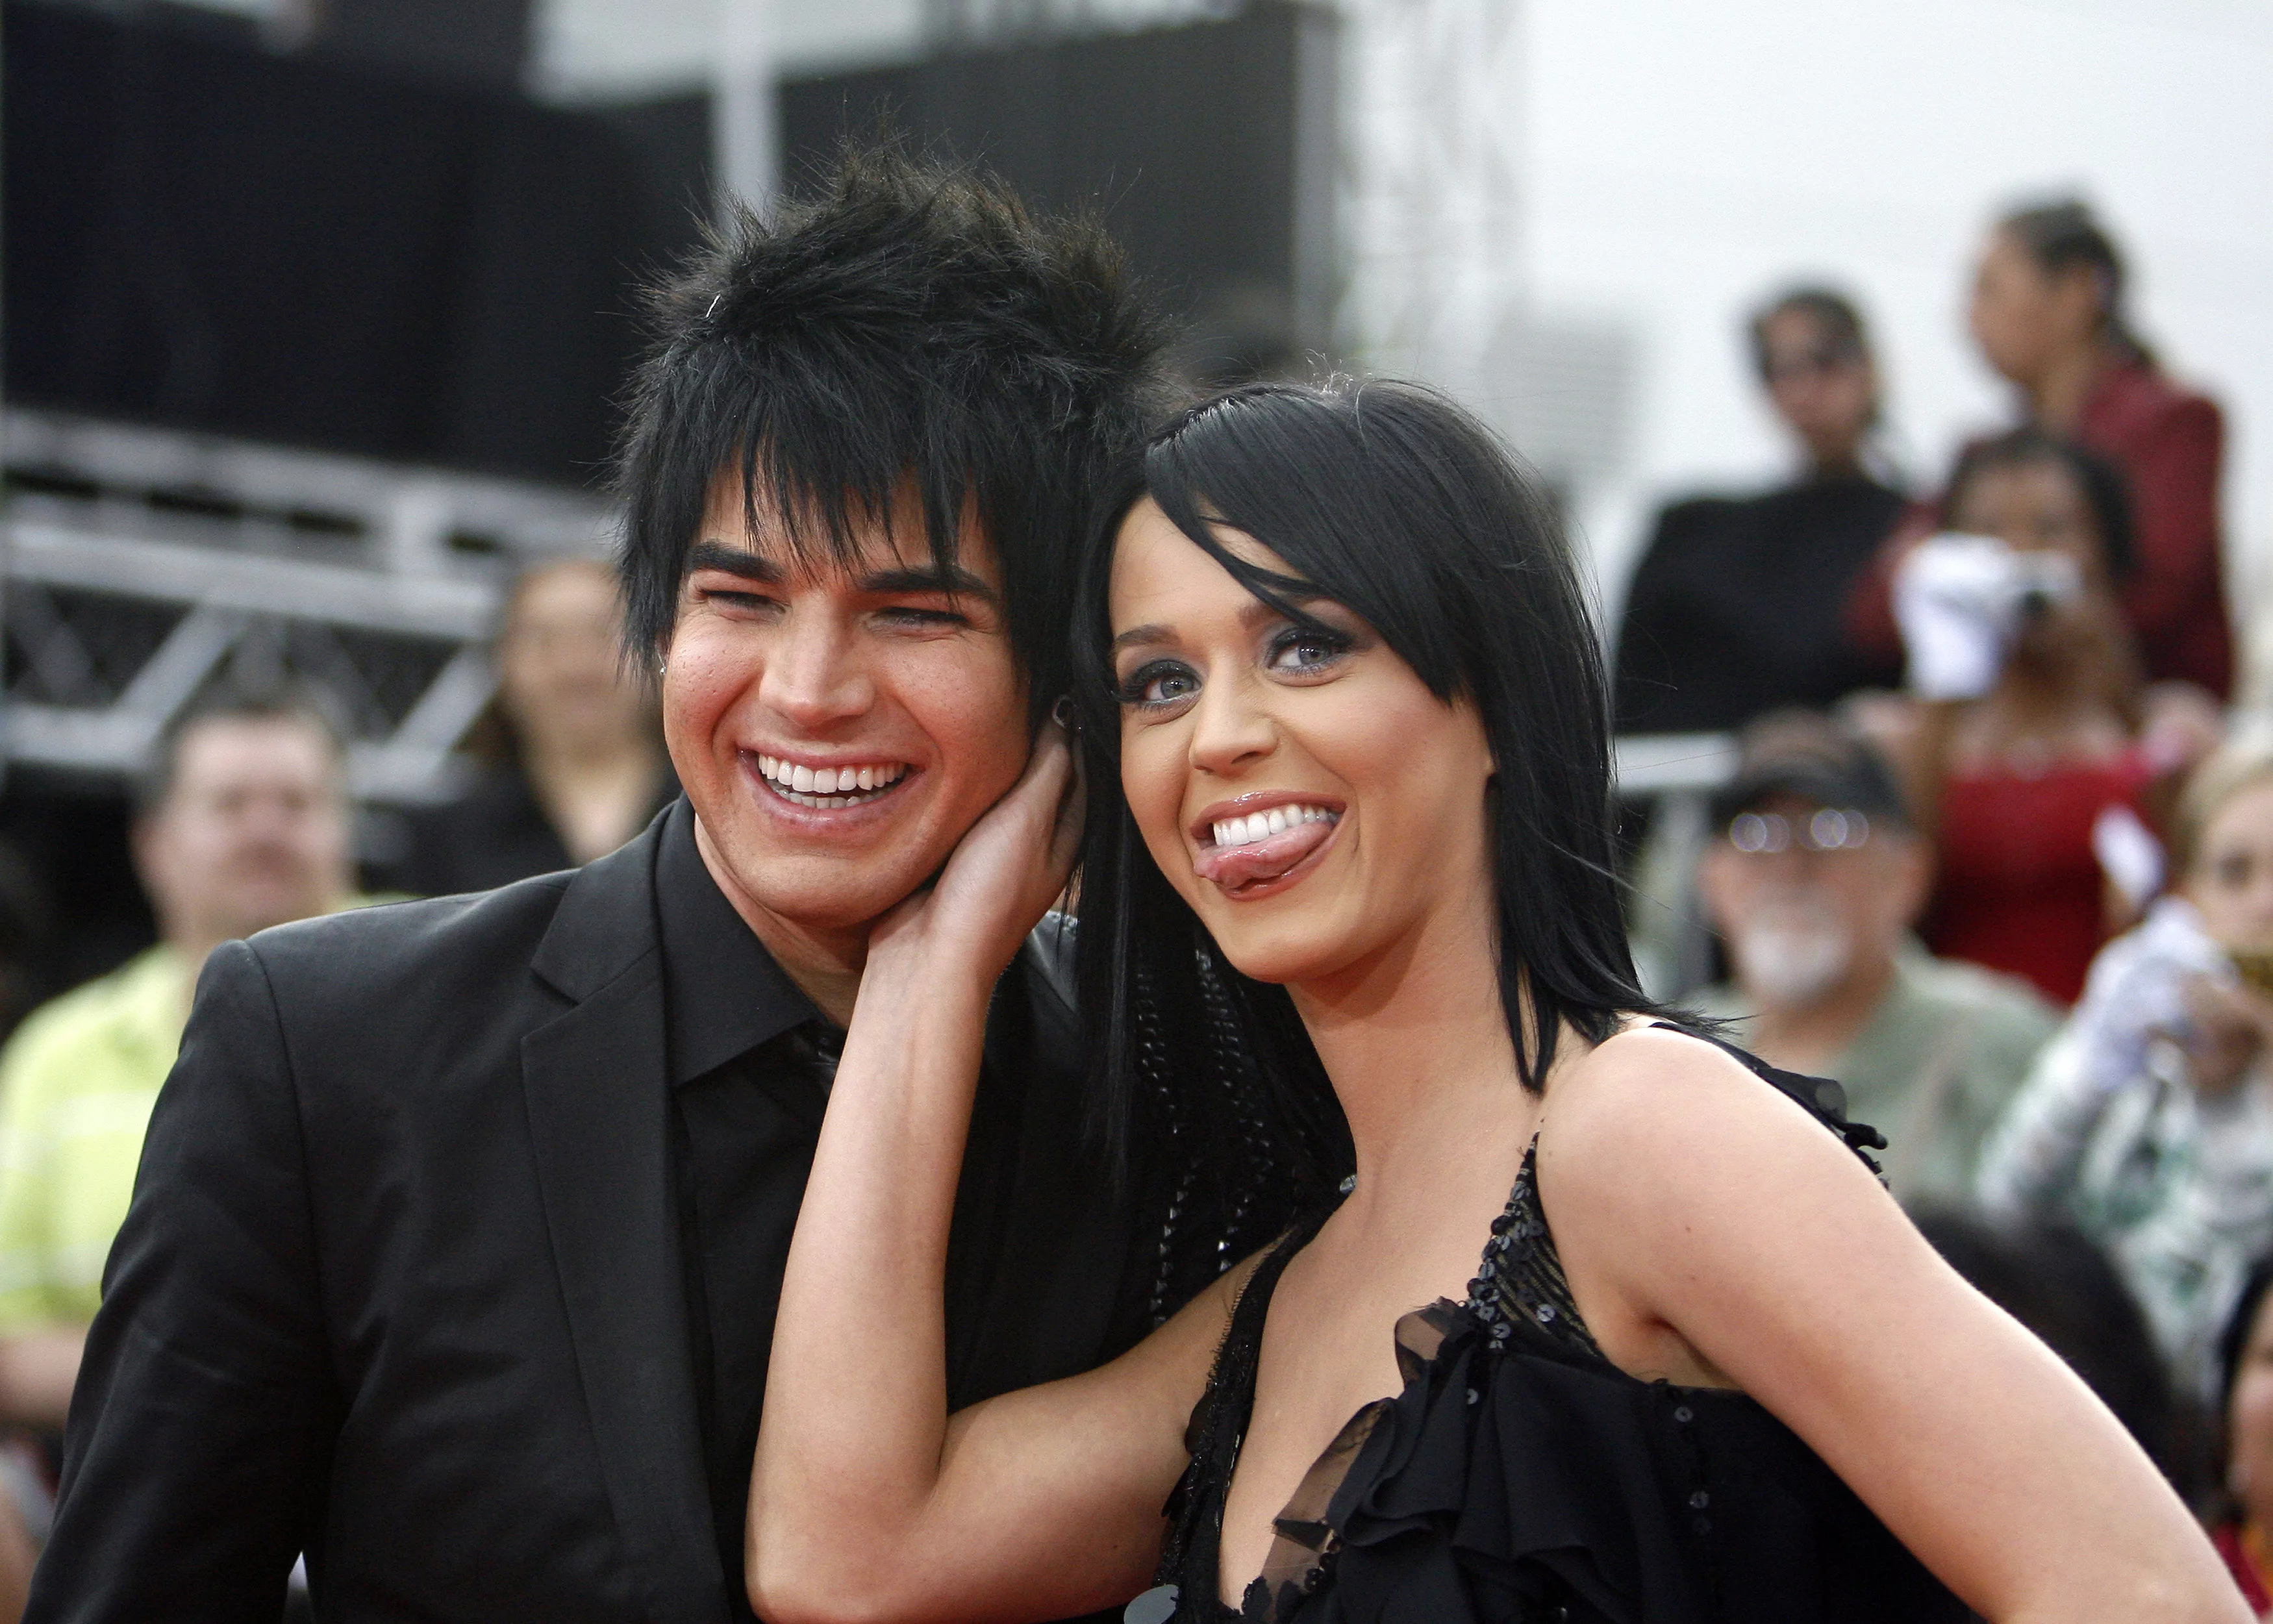 katy-perry-poses-with-adam-lambert-at-the-premiere-of-this-is-it-in-los-angeles